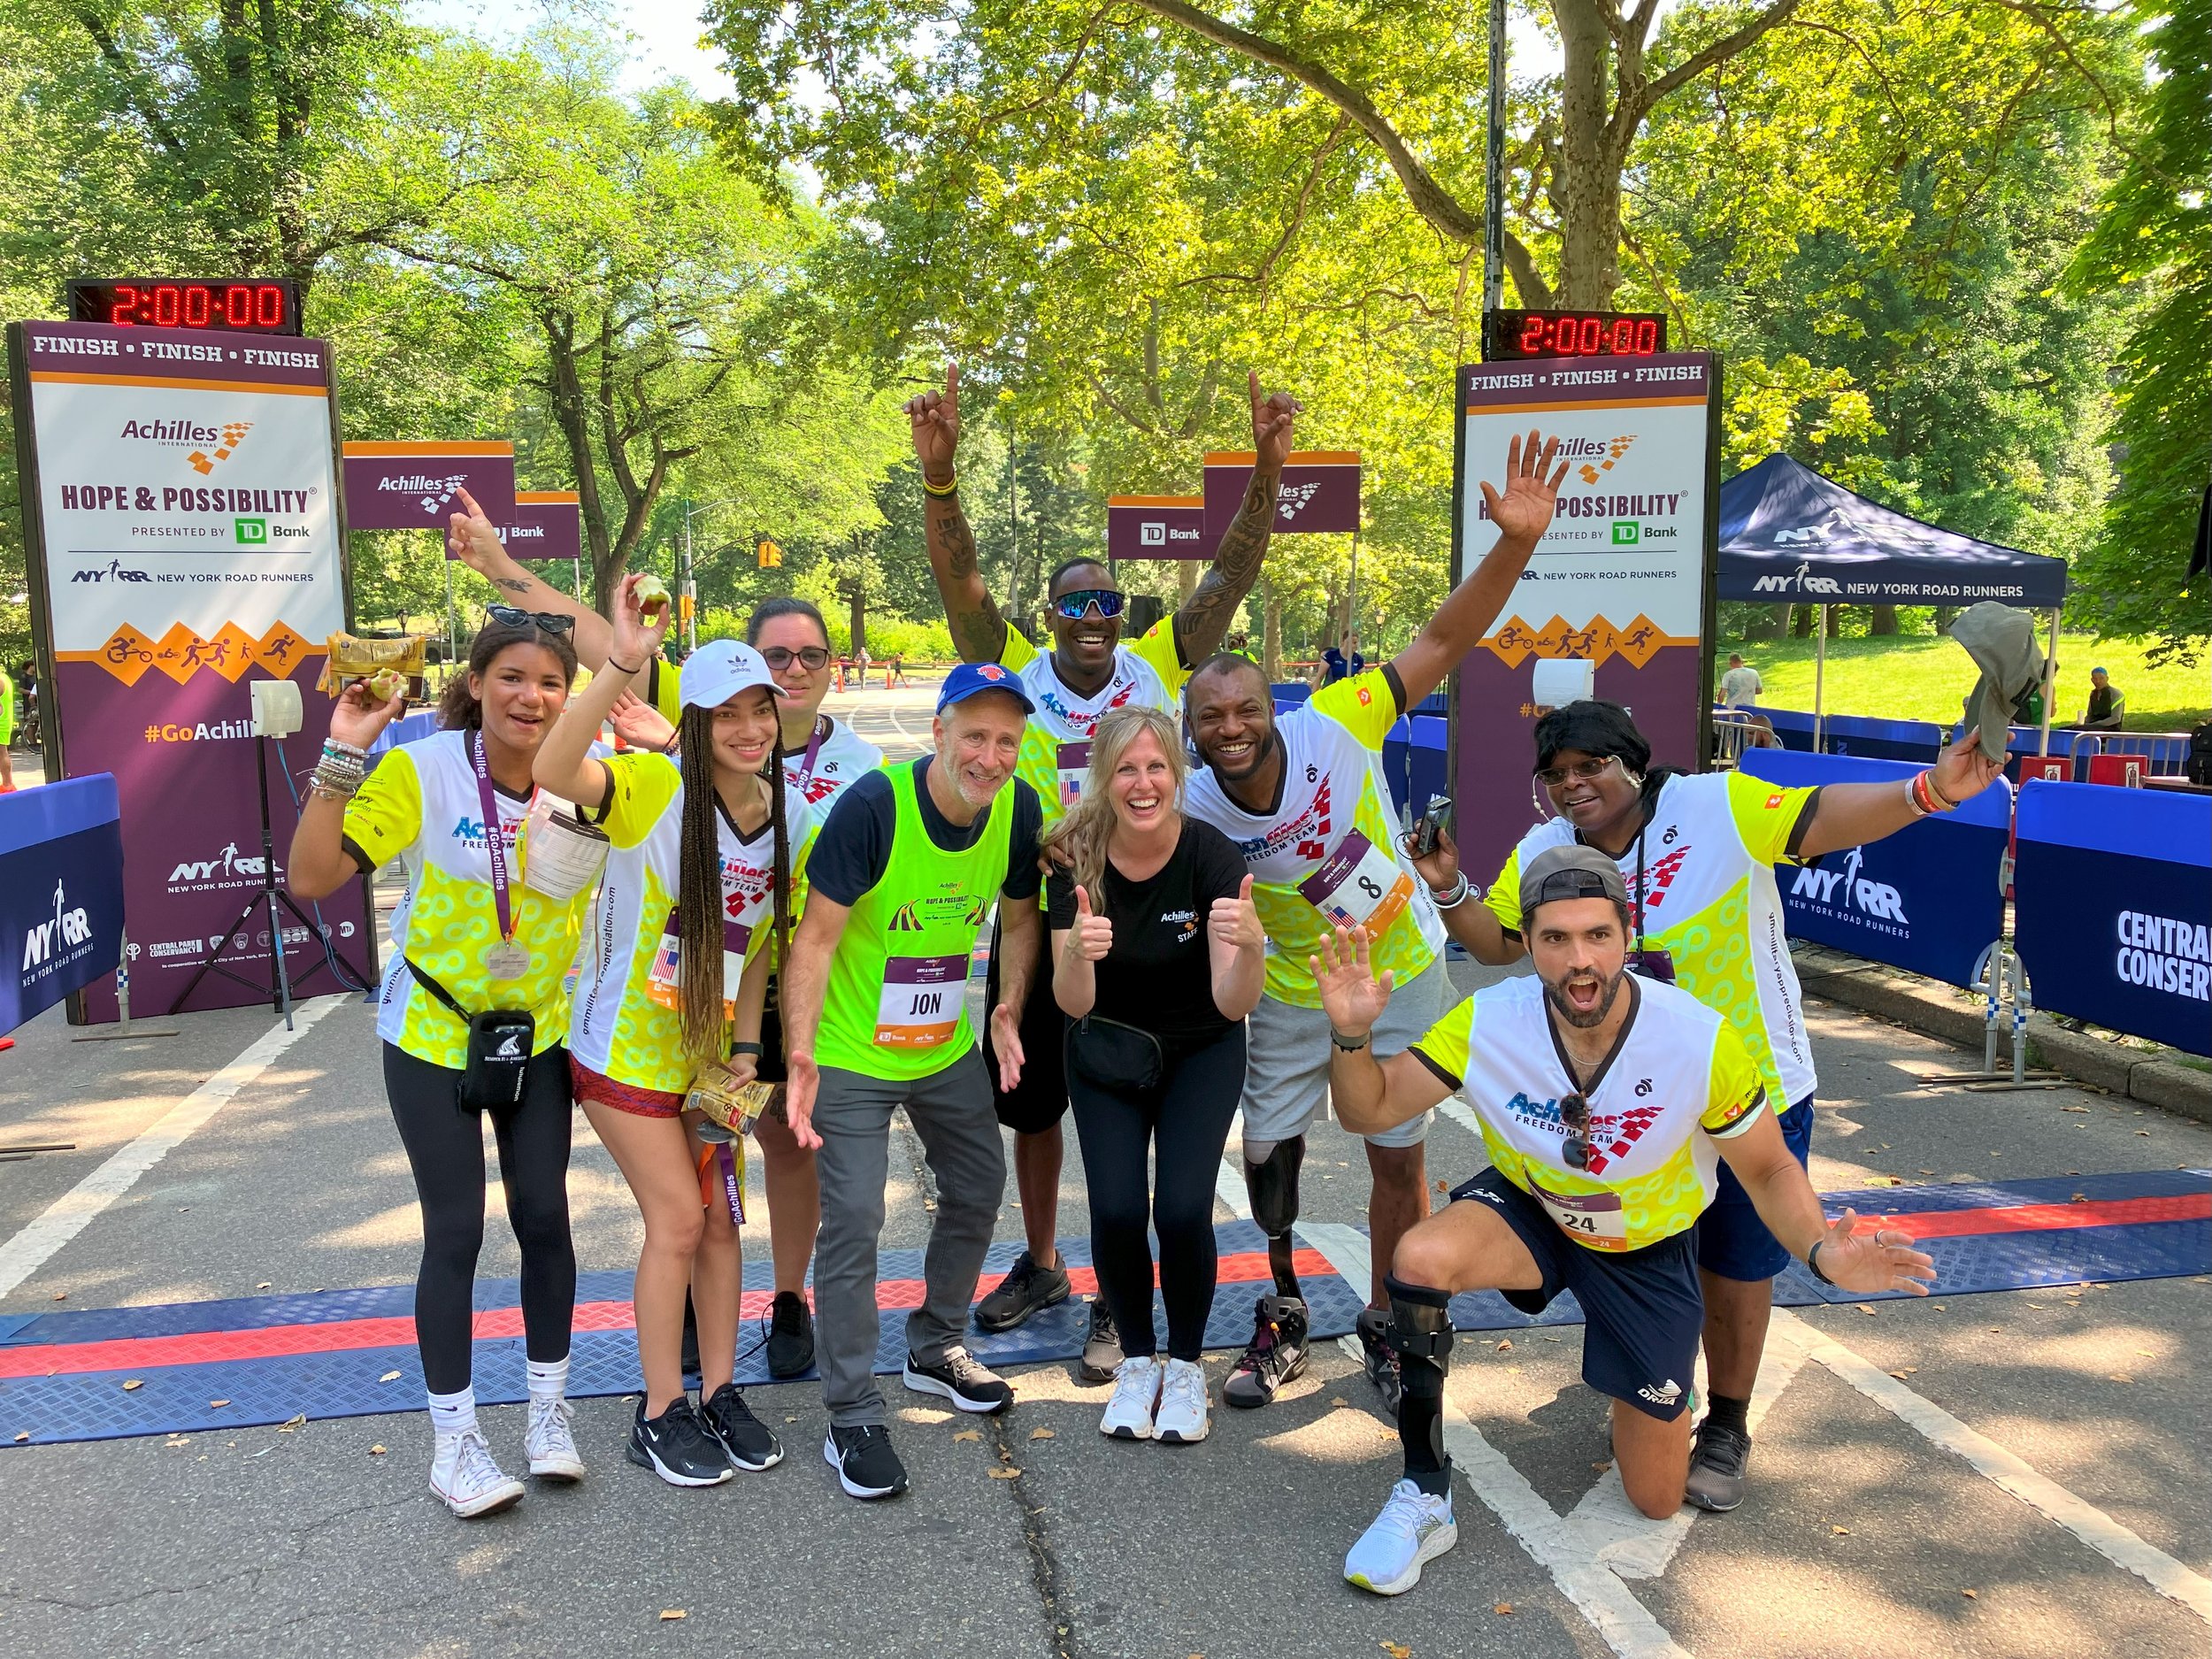  Group shot of members of the Achilles Freedom Team cheering at the finish line with Jon Stewart and Janet Patton, Director of the Achilles Freedom Team 